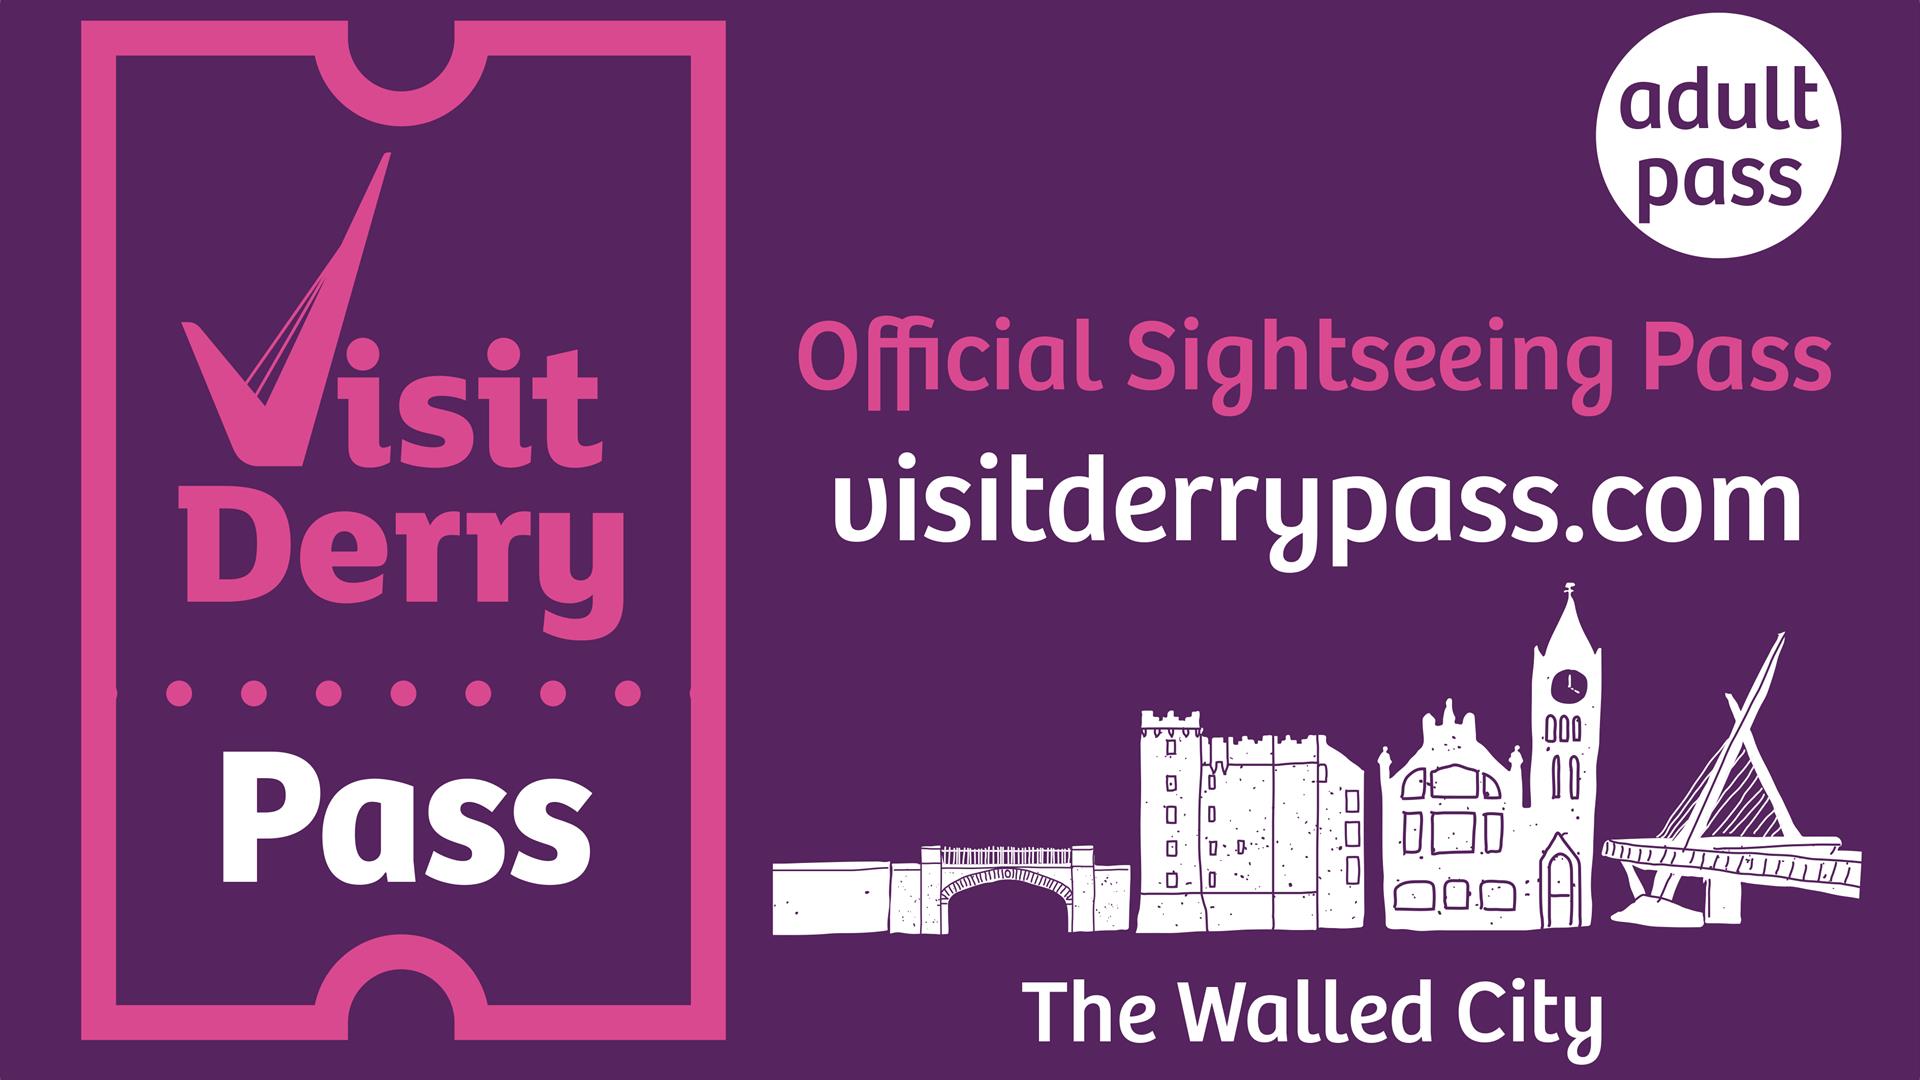 image of Visit Derry sightseeing ticket.